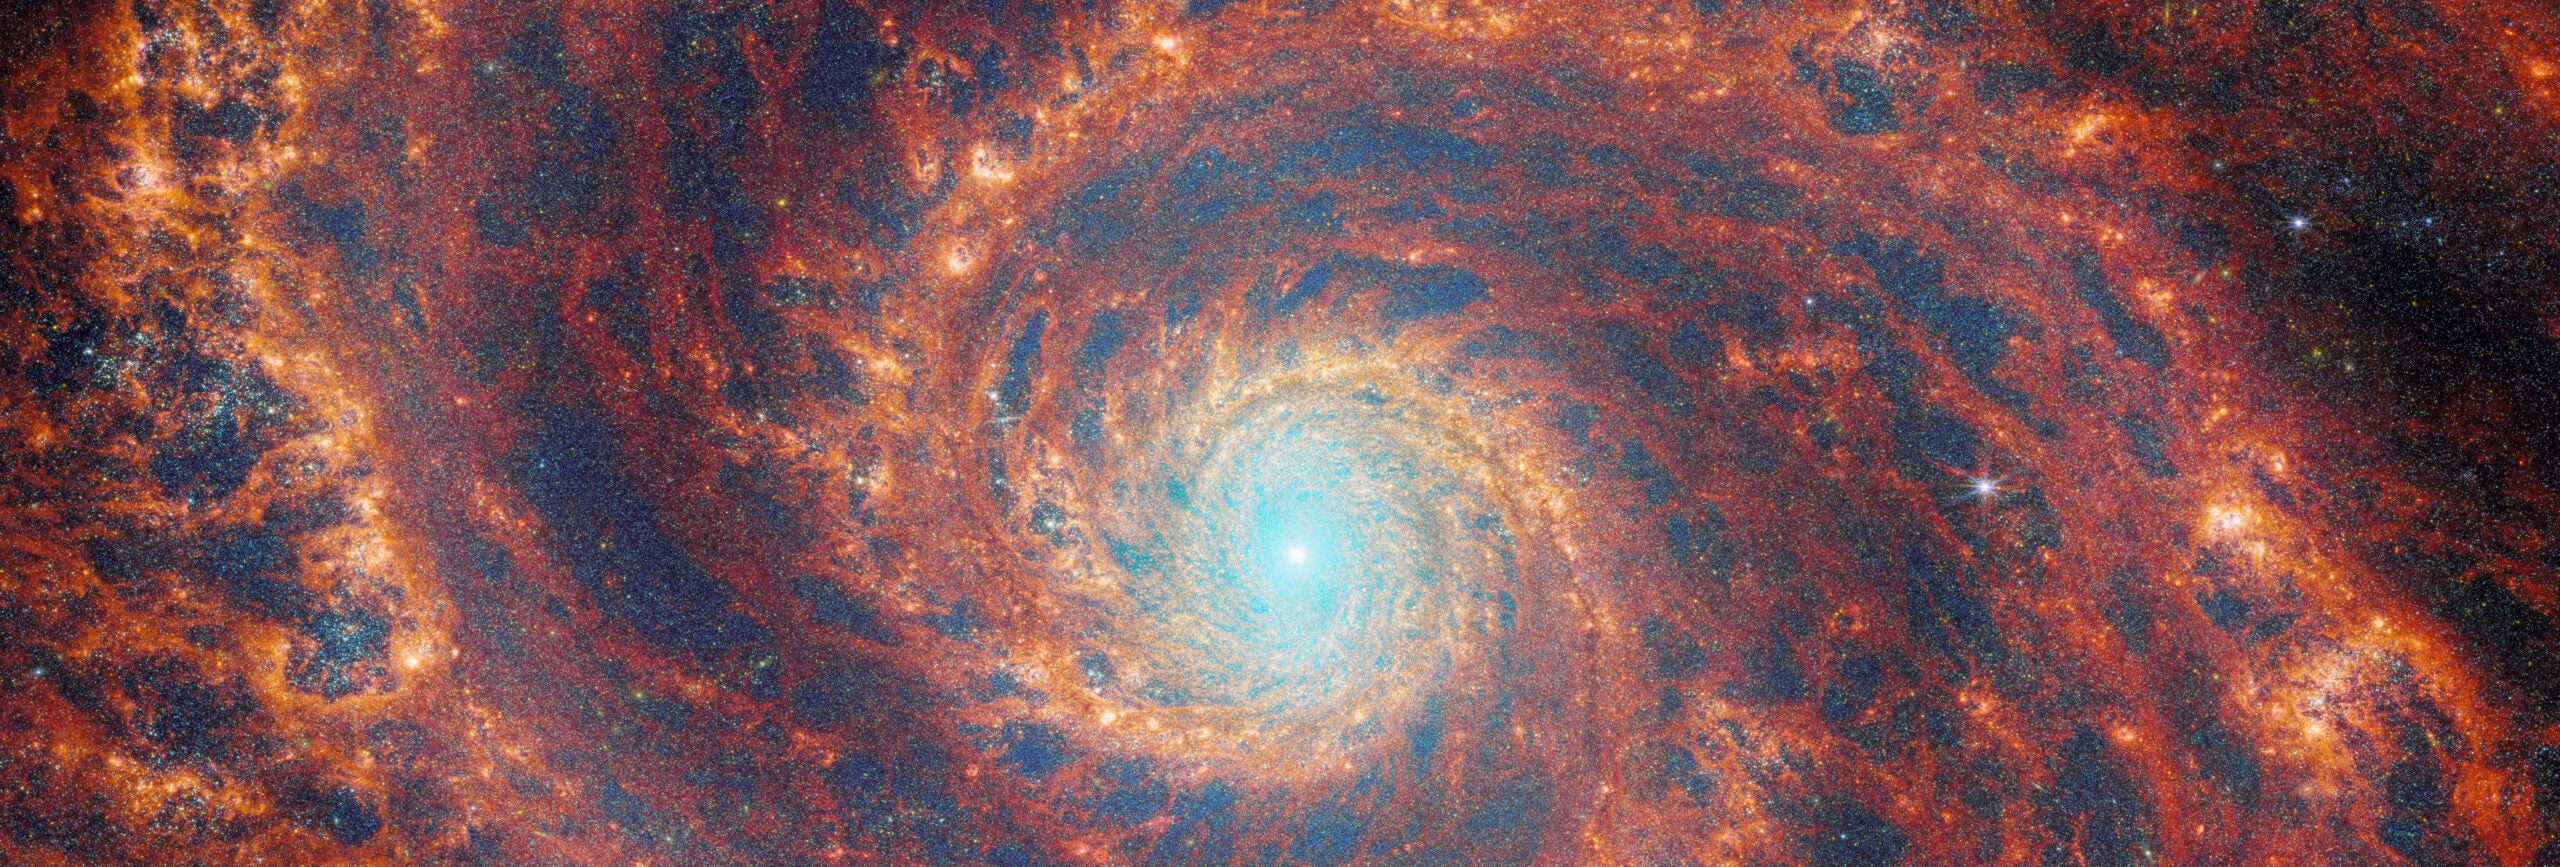 A large spiral galaxy takes up the entirety of the image. The core is mostly bright white, but there are also swirling, detailed structures that resemble water circling a drain. There is white and pale blue light that emanates from stars and dust at the coreâs center, but it is tightly limited to the core. The rings feature colors of deep red and orange and highlight filaments of dust around cavernous black bubbles